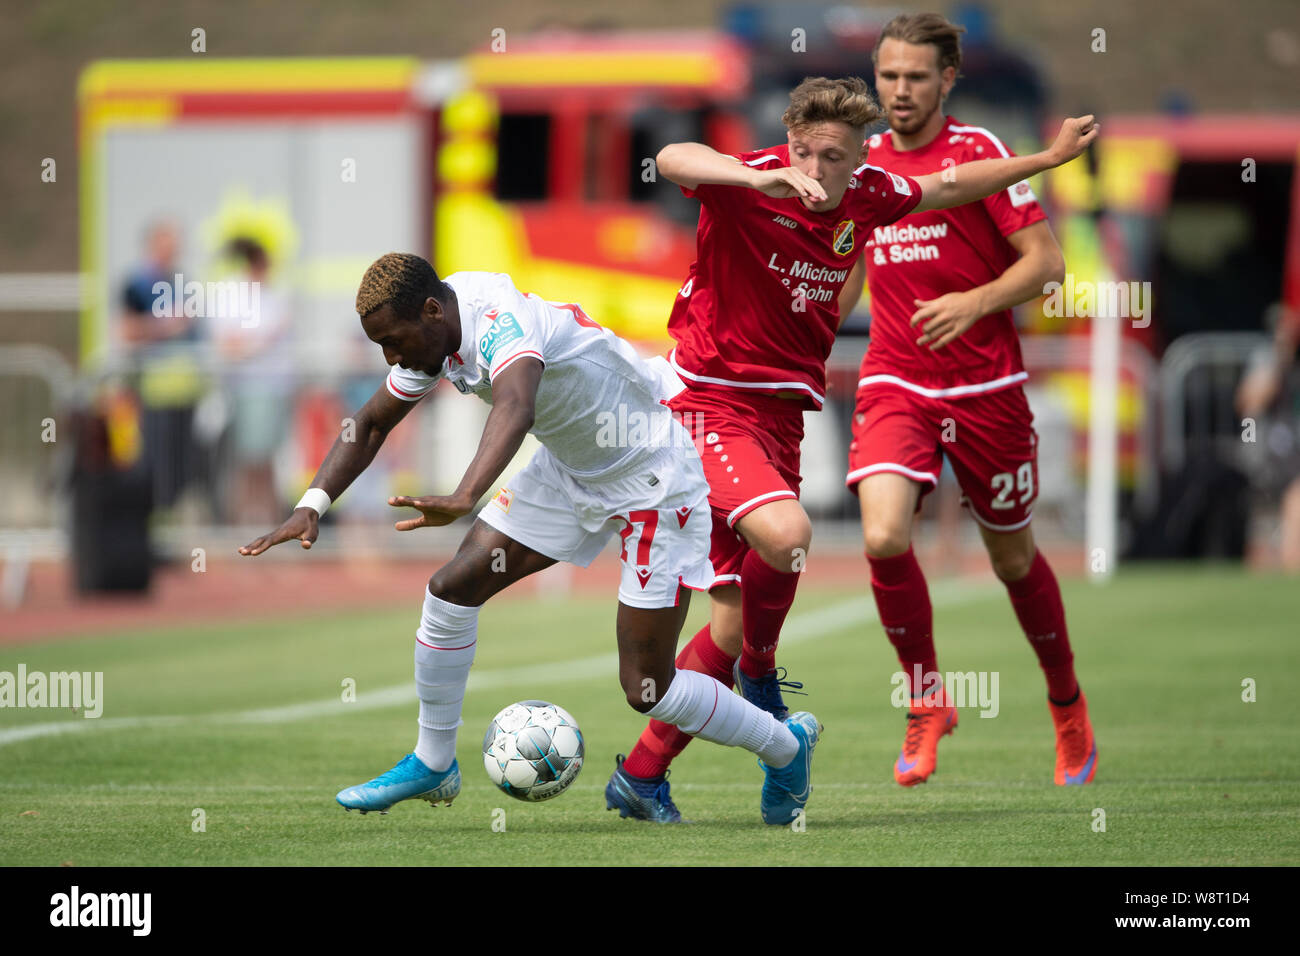 Halberstadt, Germany. 11th Aug, 2019. Soccer: DFB Cup, Germania Halberstadt - 1st FC Union Berlin, 1st round in Friedensstadion. Berlin's Sheraldo Becker (l) plays against Halberstadt's Justin Bretgeld (M). Credit: Swen Pförtner/dpa - IMPORTANT NOTE: In accordance with the requirements of the DFL Deutsche Fußball Liga or the DFB Deutscher Fußball-Bund, it is prohibited to use or have used photographs taken in the stadium and/or the match in the form of sequence images and/or video-like photo sequences./dpa/Alamy Live News Stock Photo